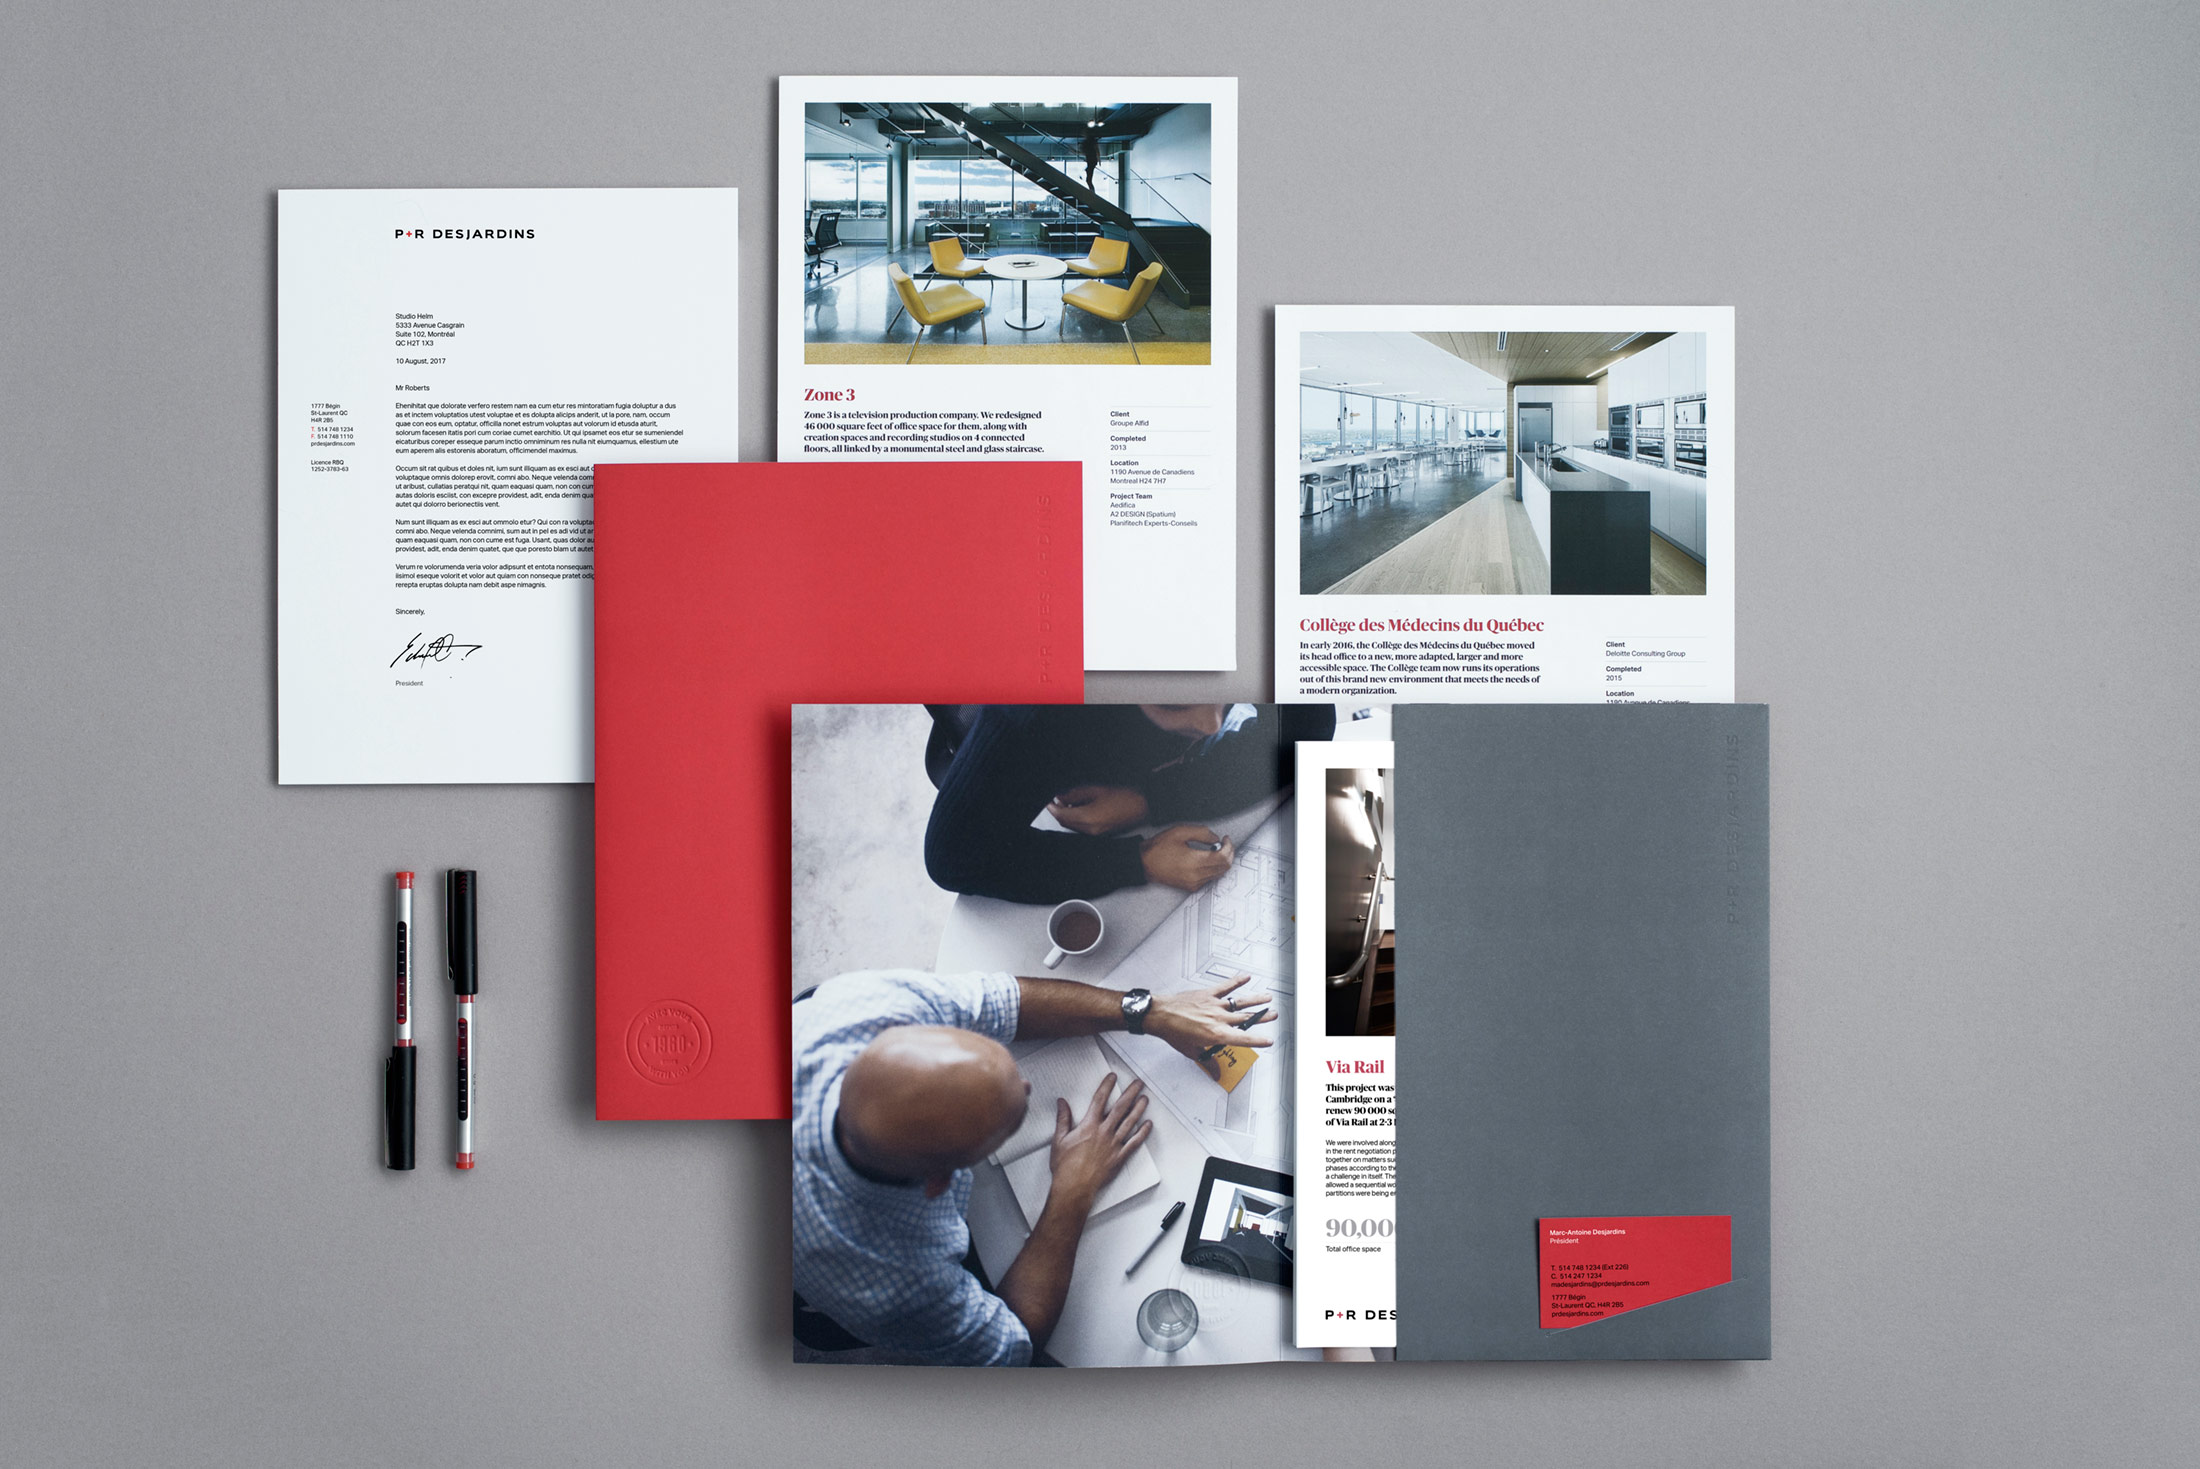 Print collateral for P&R Desjardins